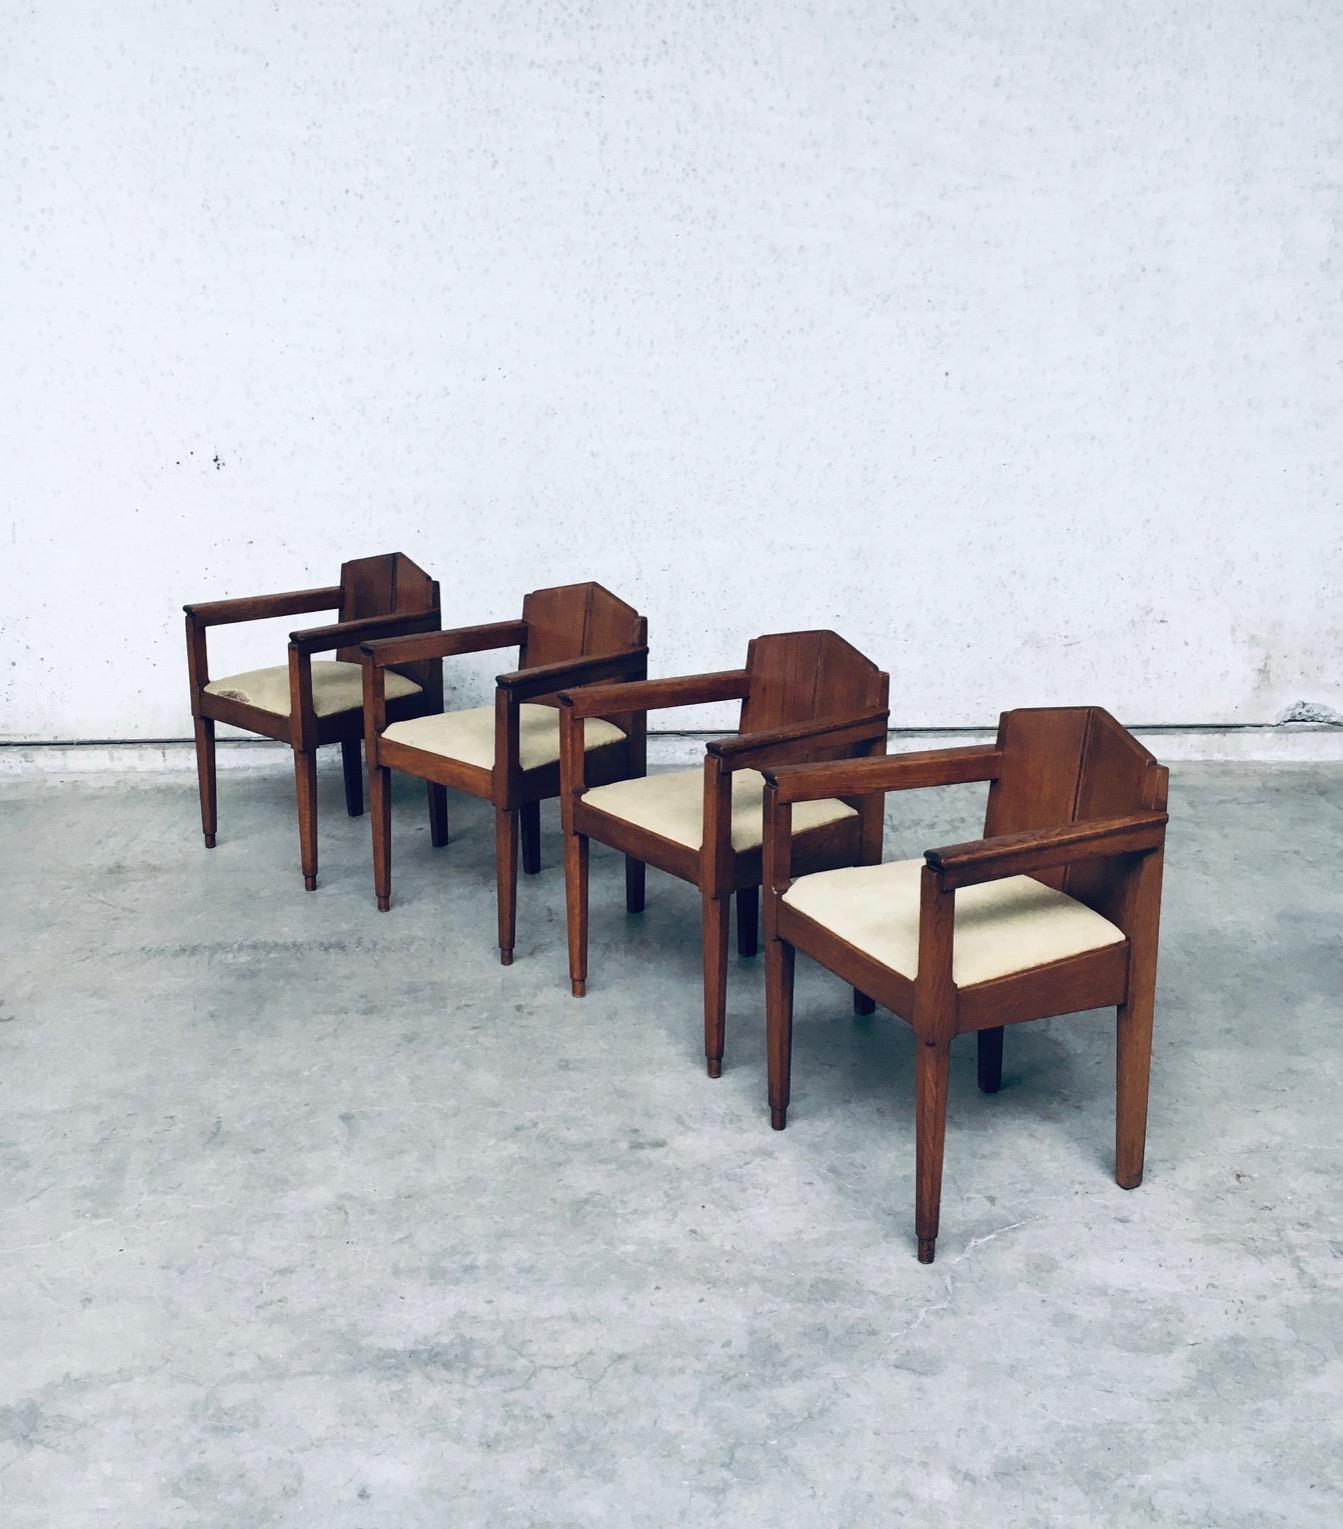 Other 1910's Dutch Modernism Design Amsterdam School Dining Chair set For Sale